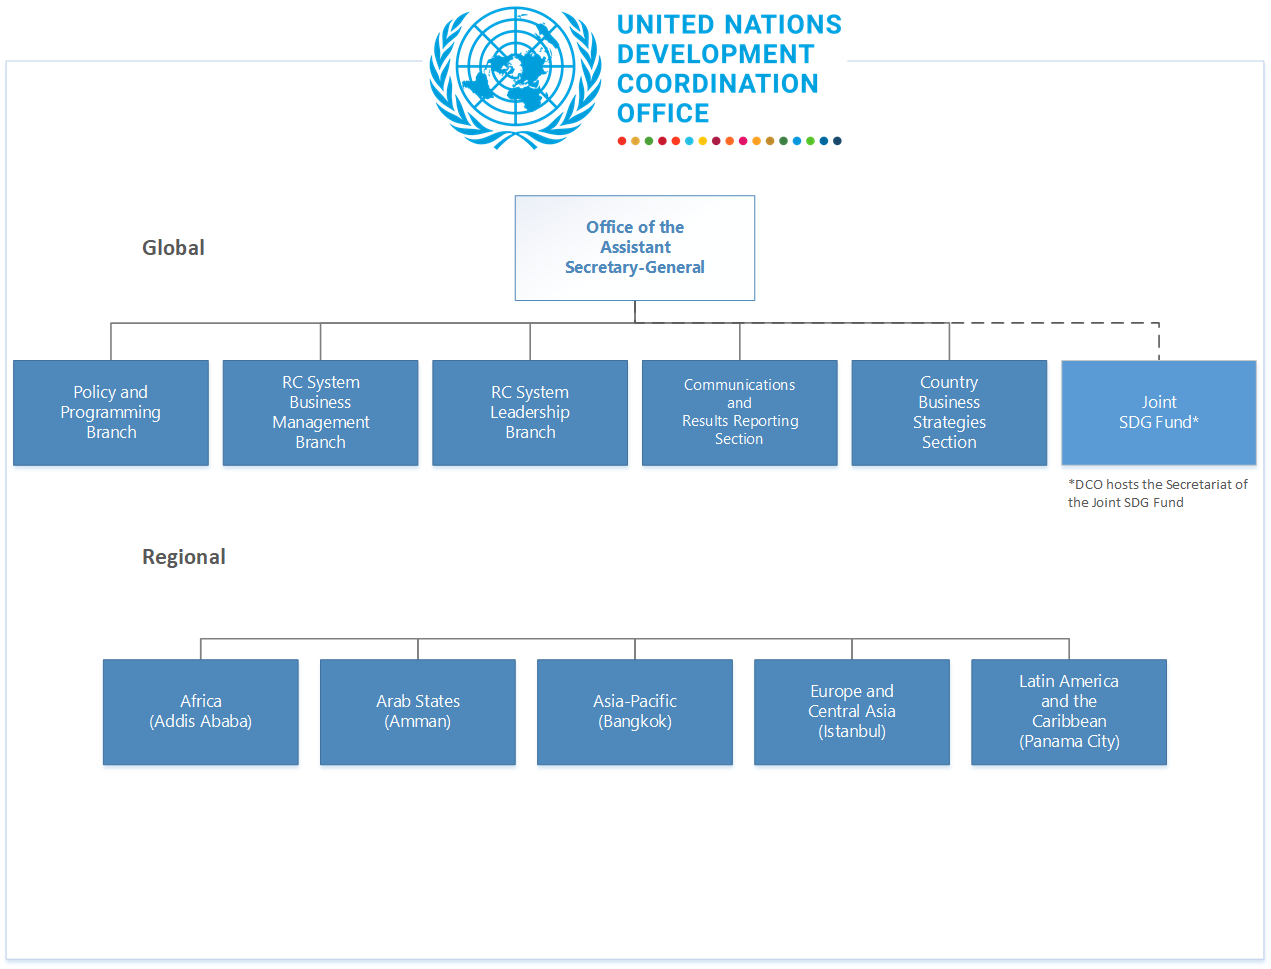 Organigramme of the United Nations Development Coordination Office